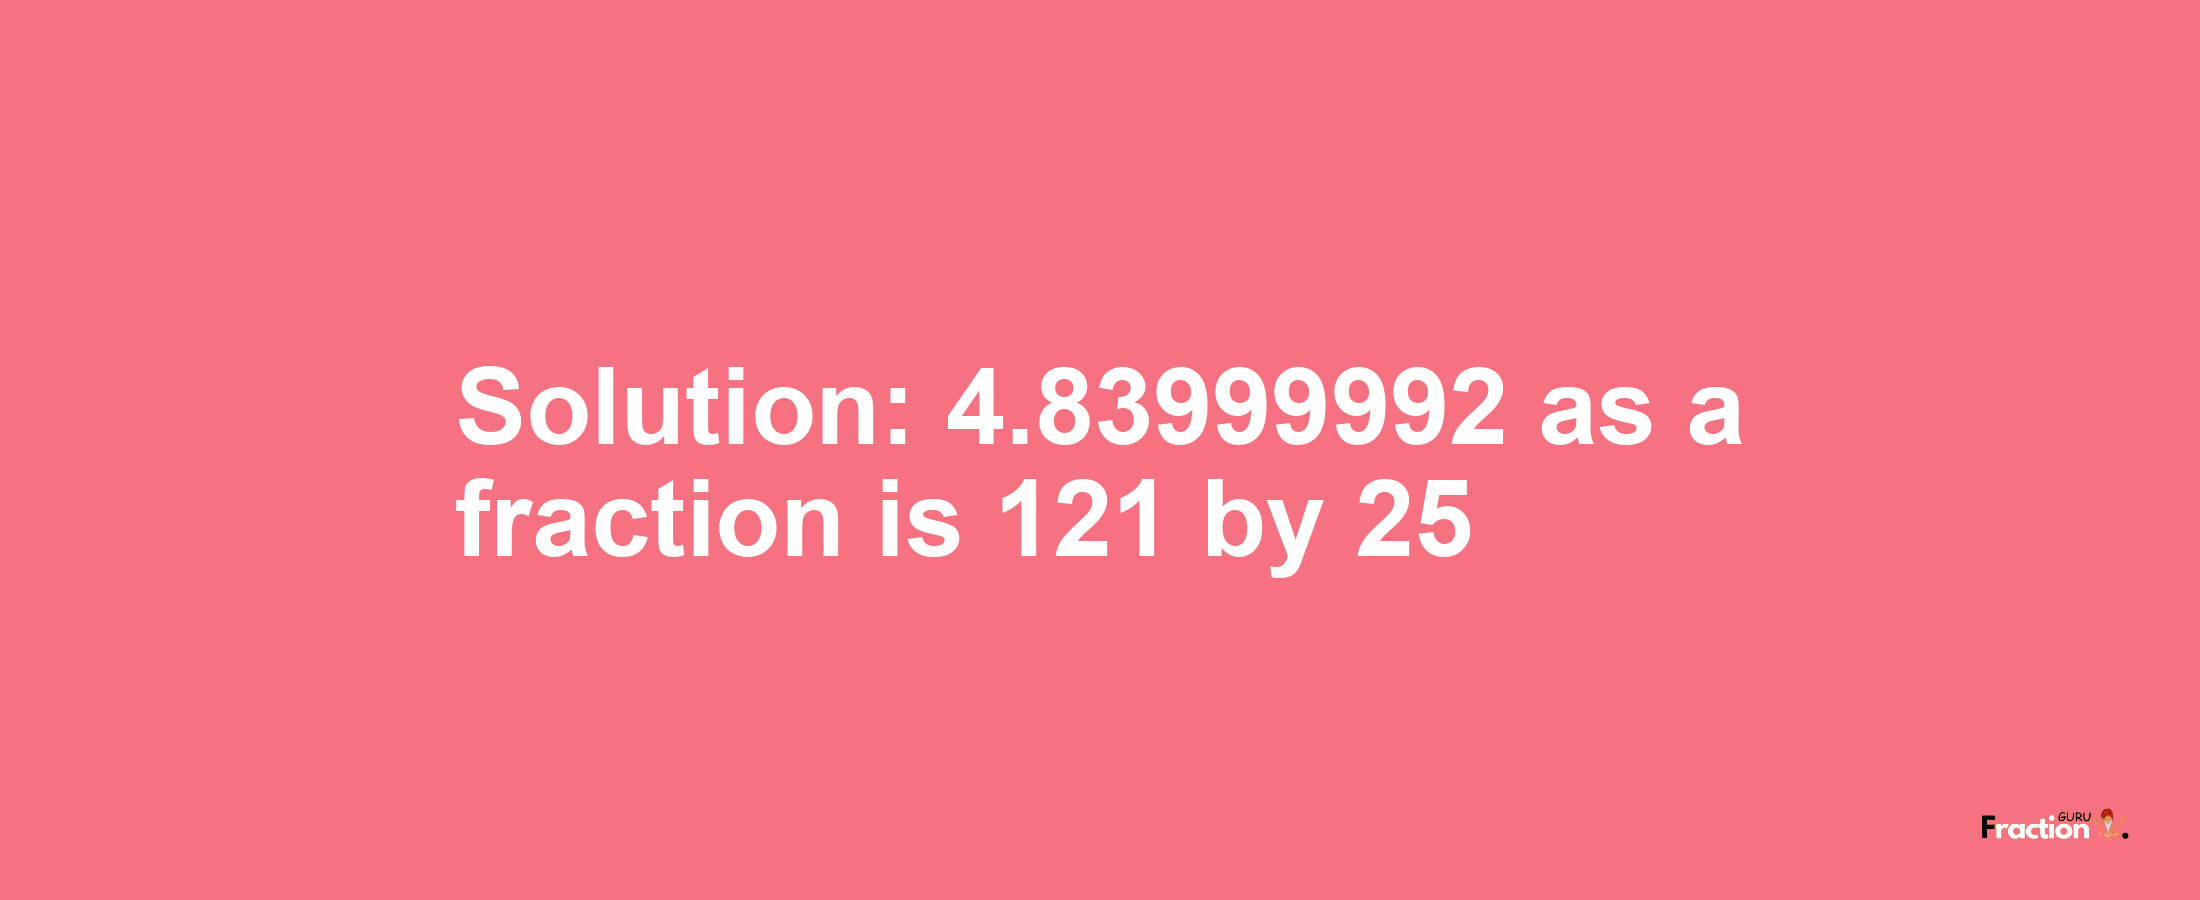 Solution:4.83999992 as a fraction is 121/25